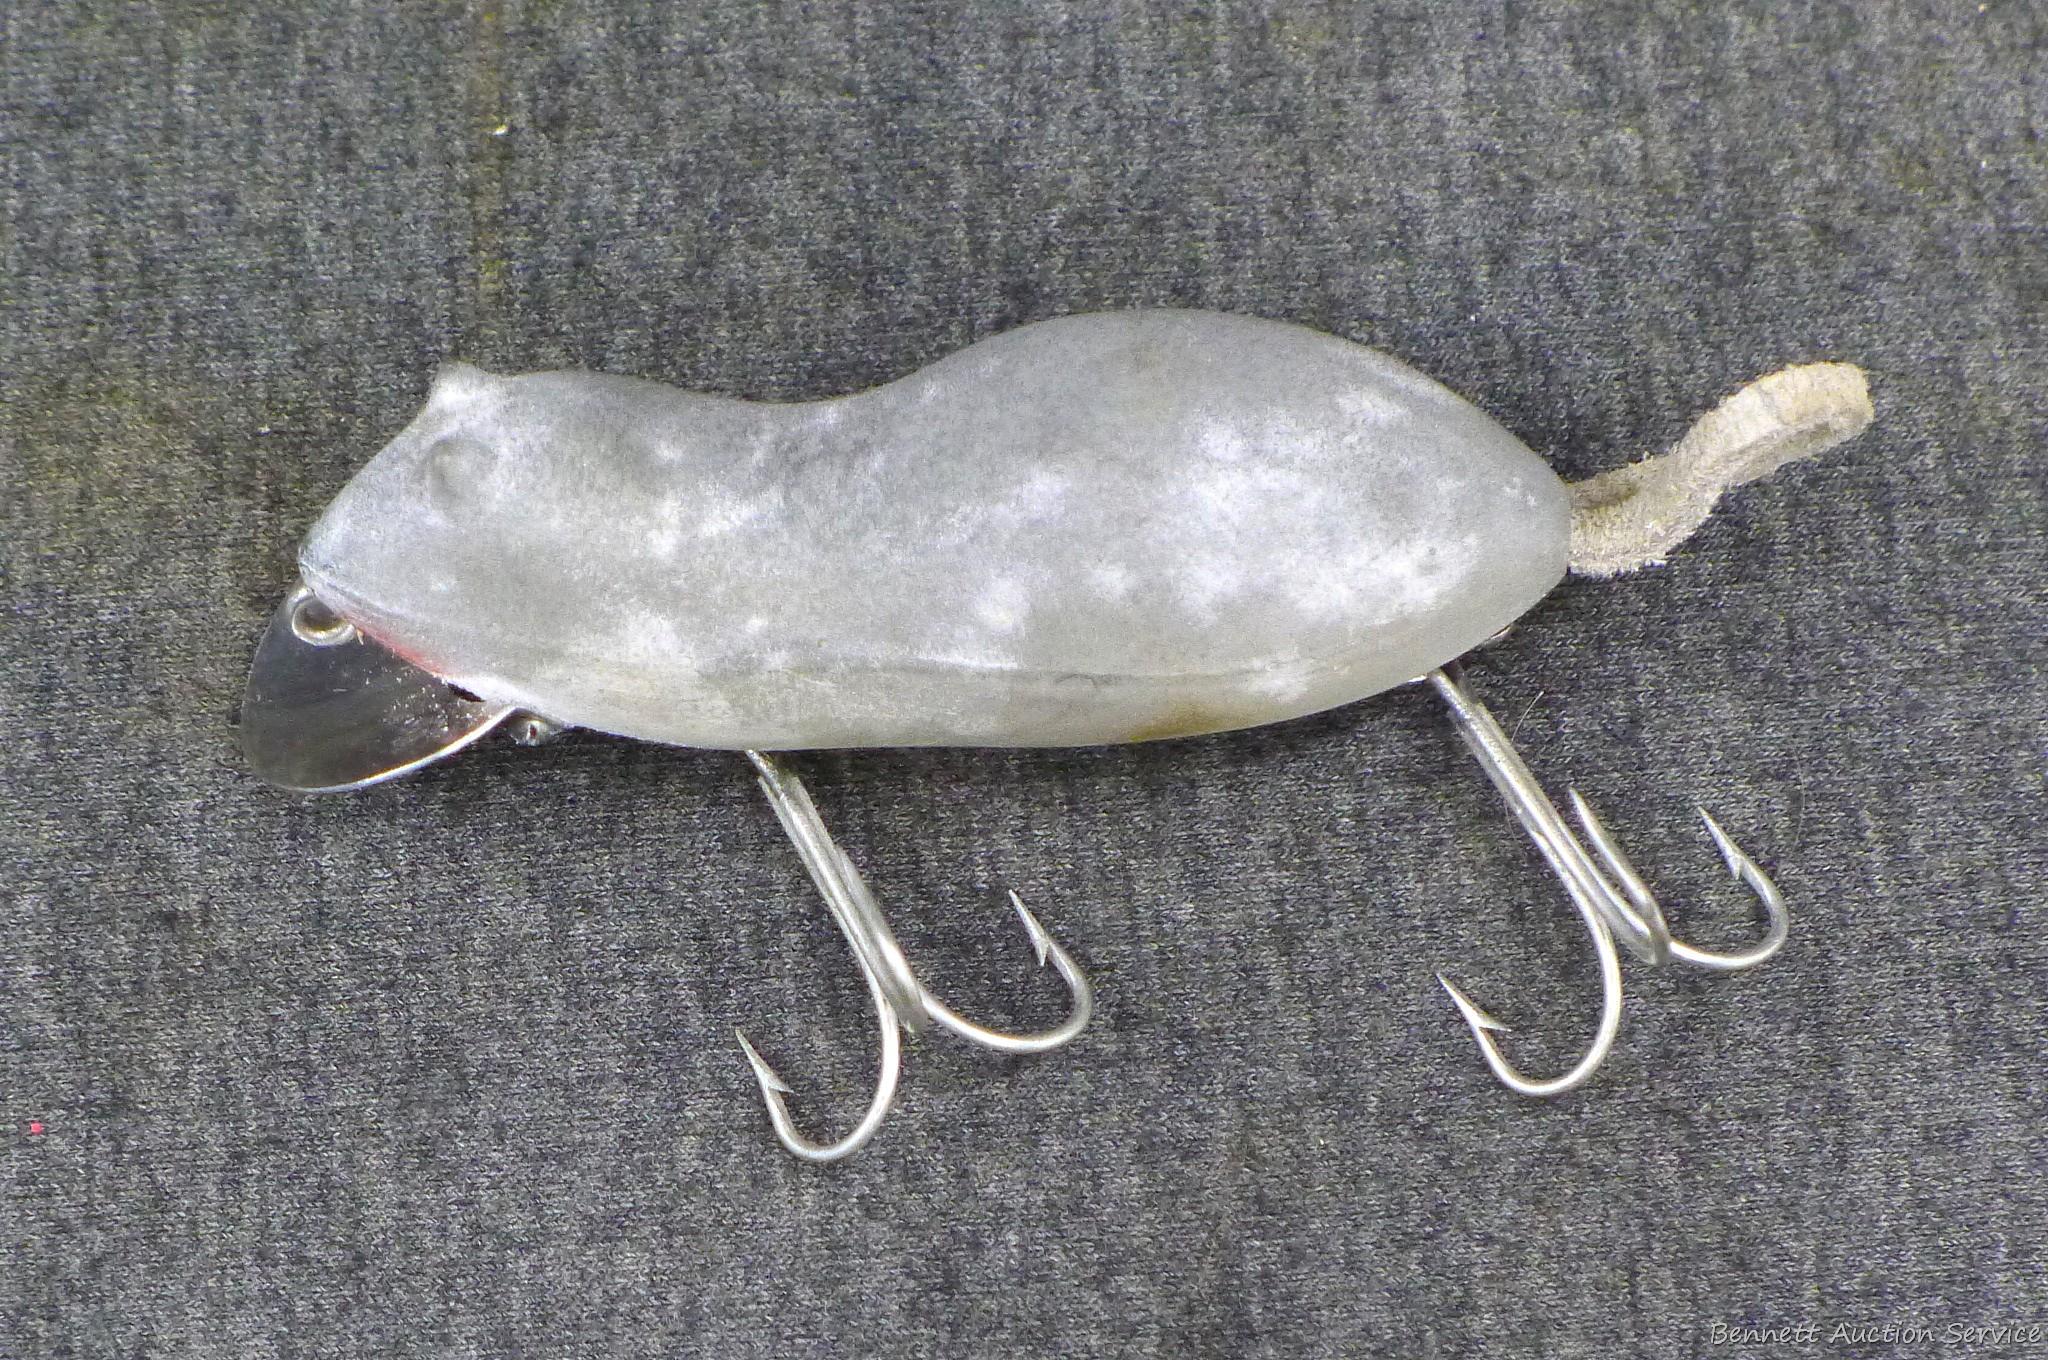 Vintage Heddon Meadow Mouse fishing lure is about